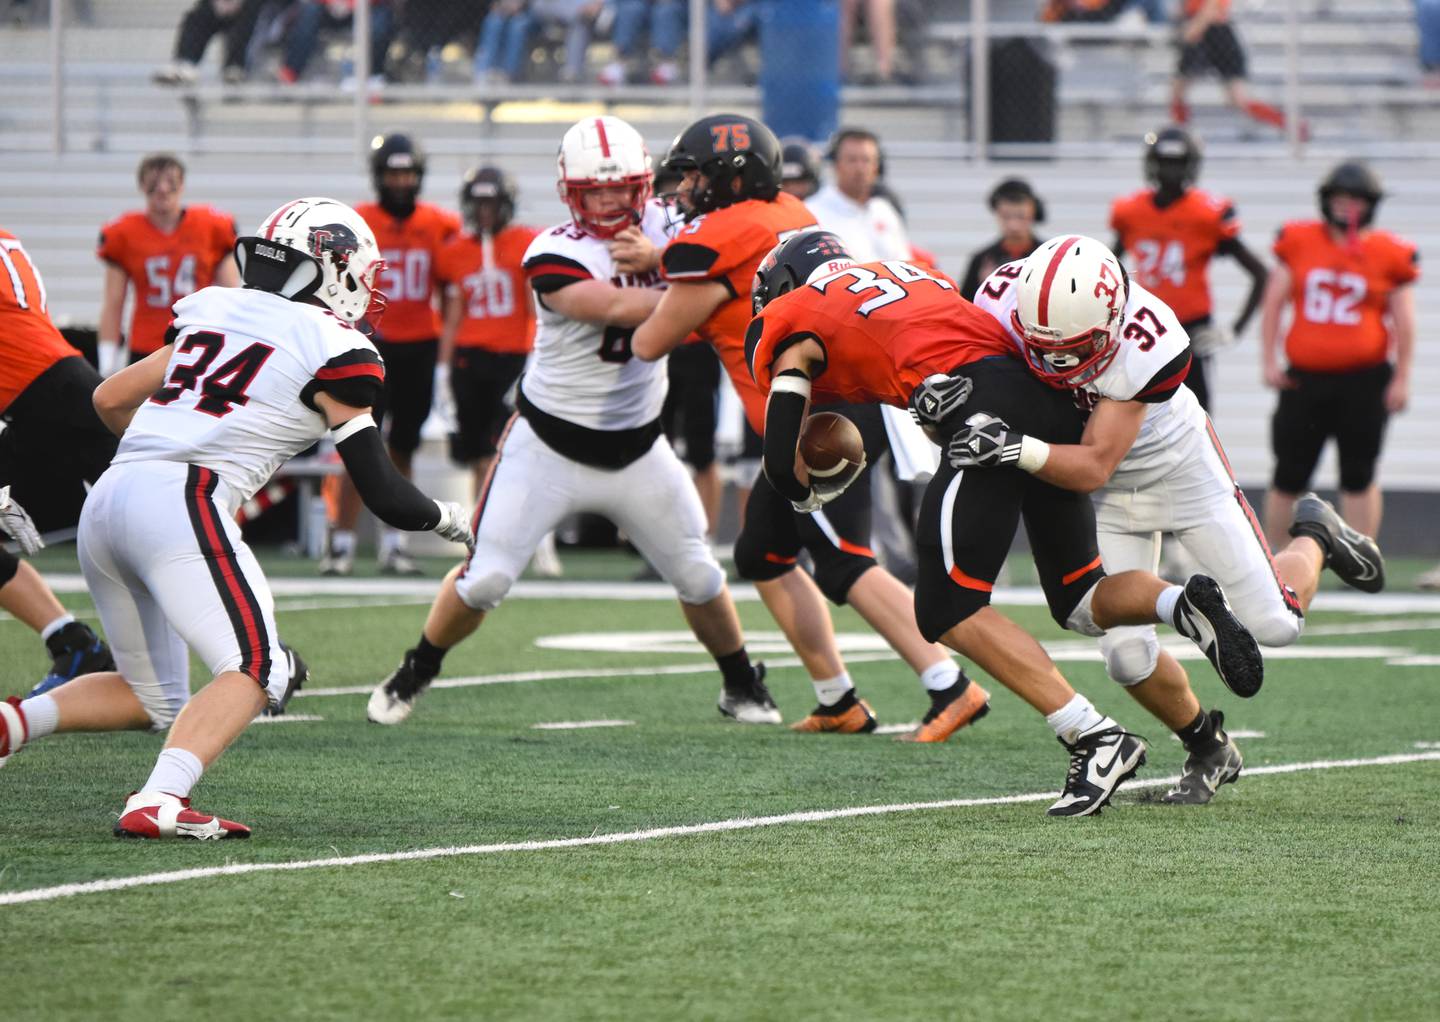 Linebacker Lucas Travis (No.37) gets the stop on the Tigers ball carrier, Chase Ragaller while Milo Stave (No.34) comes in for the assist. Travis had six solo tackles.